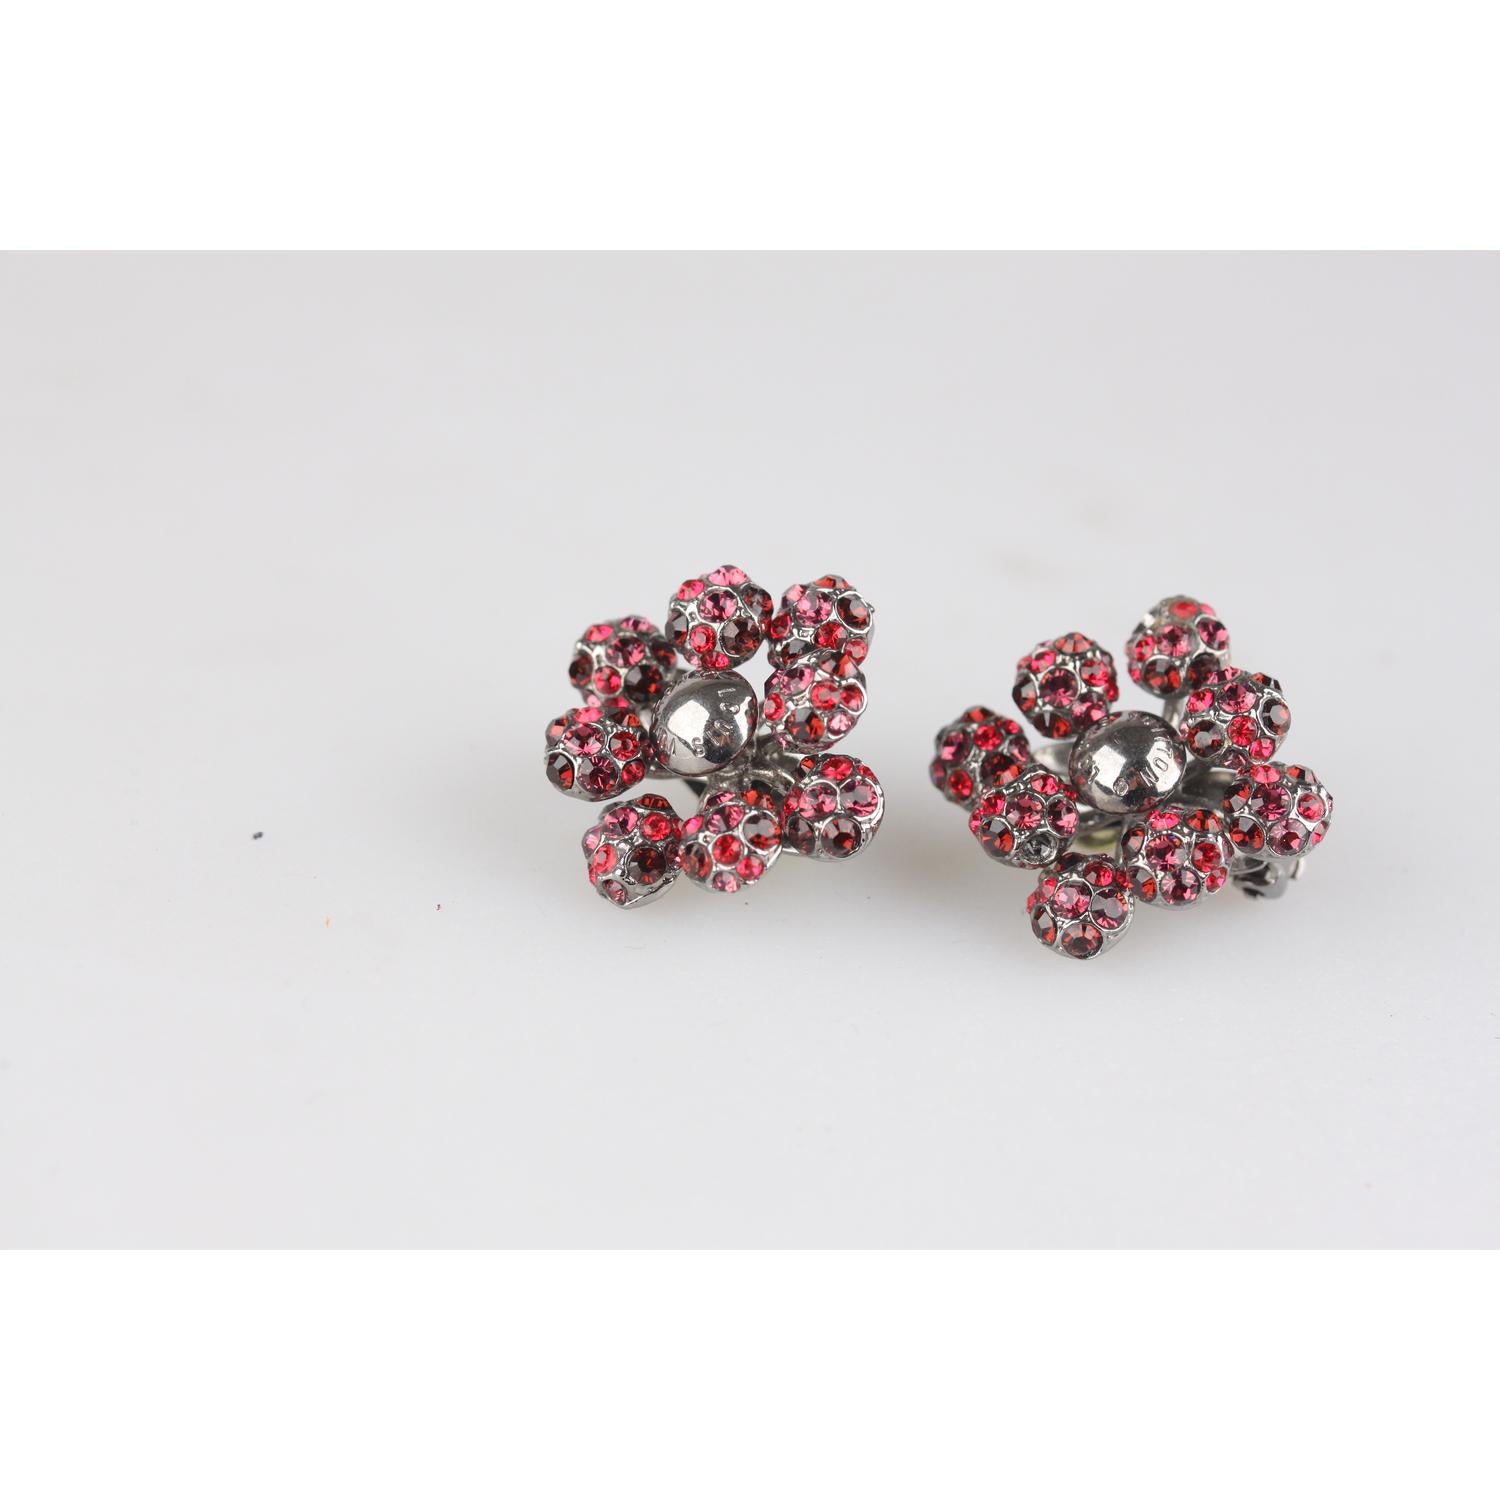 Beautiful earrings by Louis Vuitton from the 2008 '1001 Nuits' collection. Crafted in gunmetal brass with red and purple faceted crystals. clip-on closure. Width: 1  inches - 2,5 cm.  LOUIS VUITTON engraved on each earring